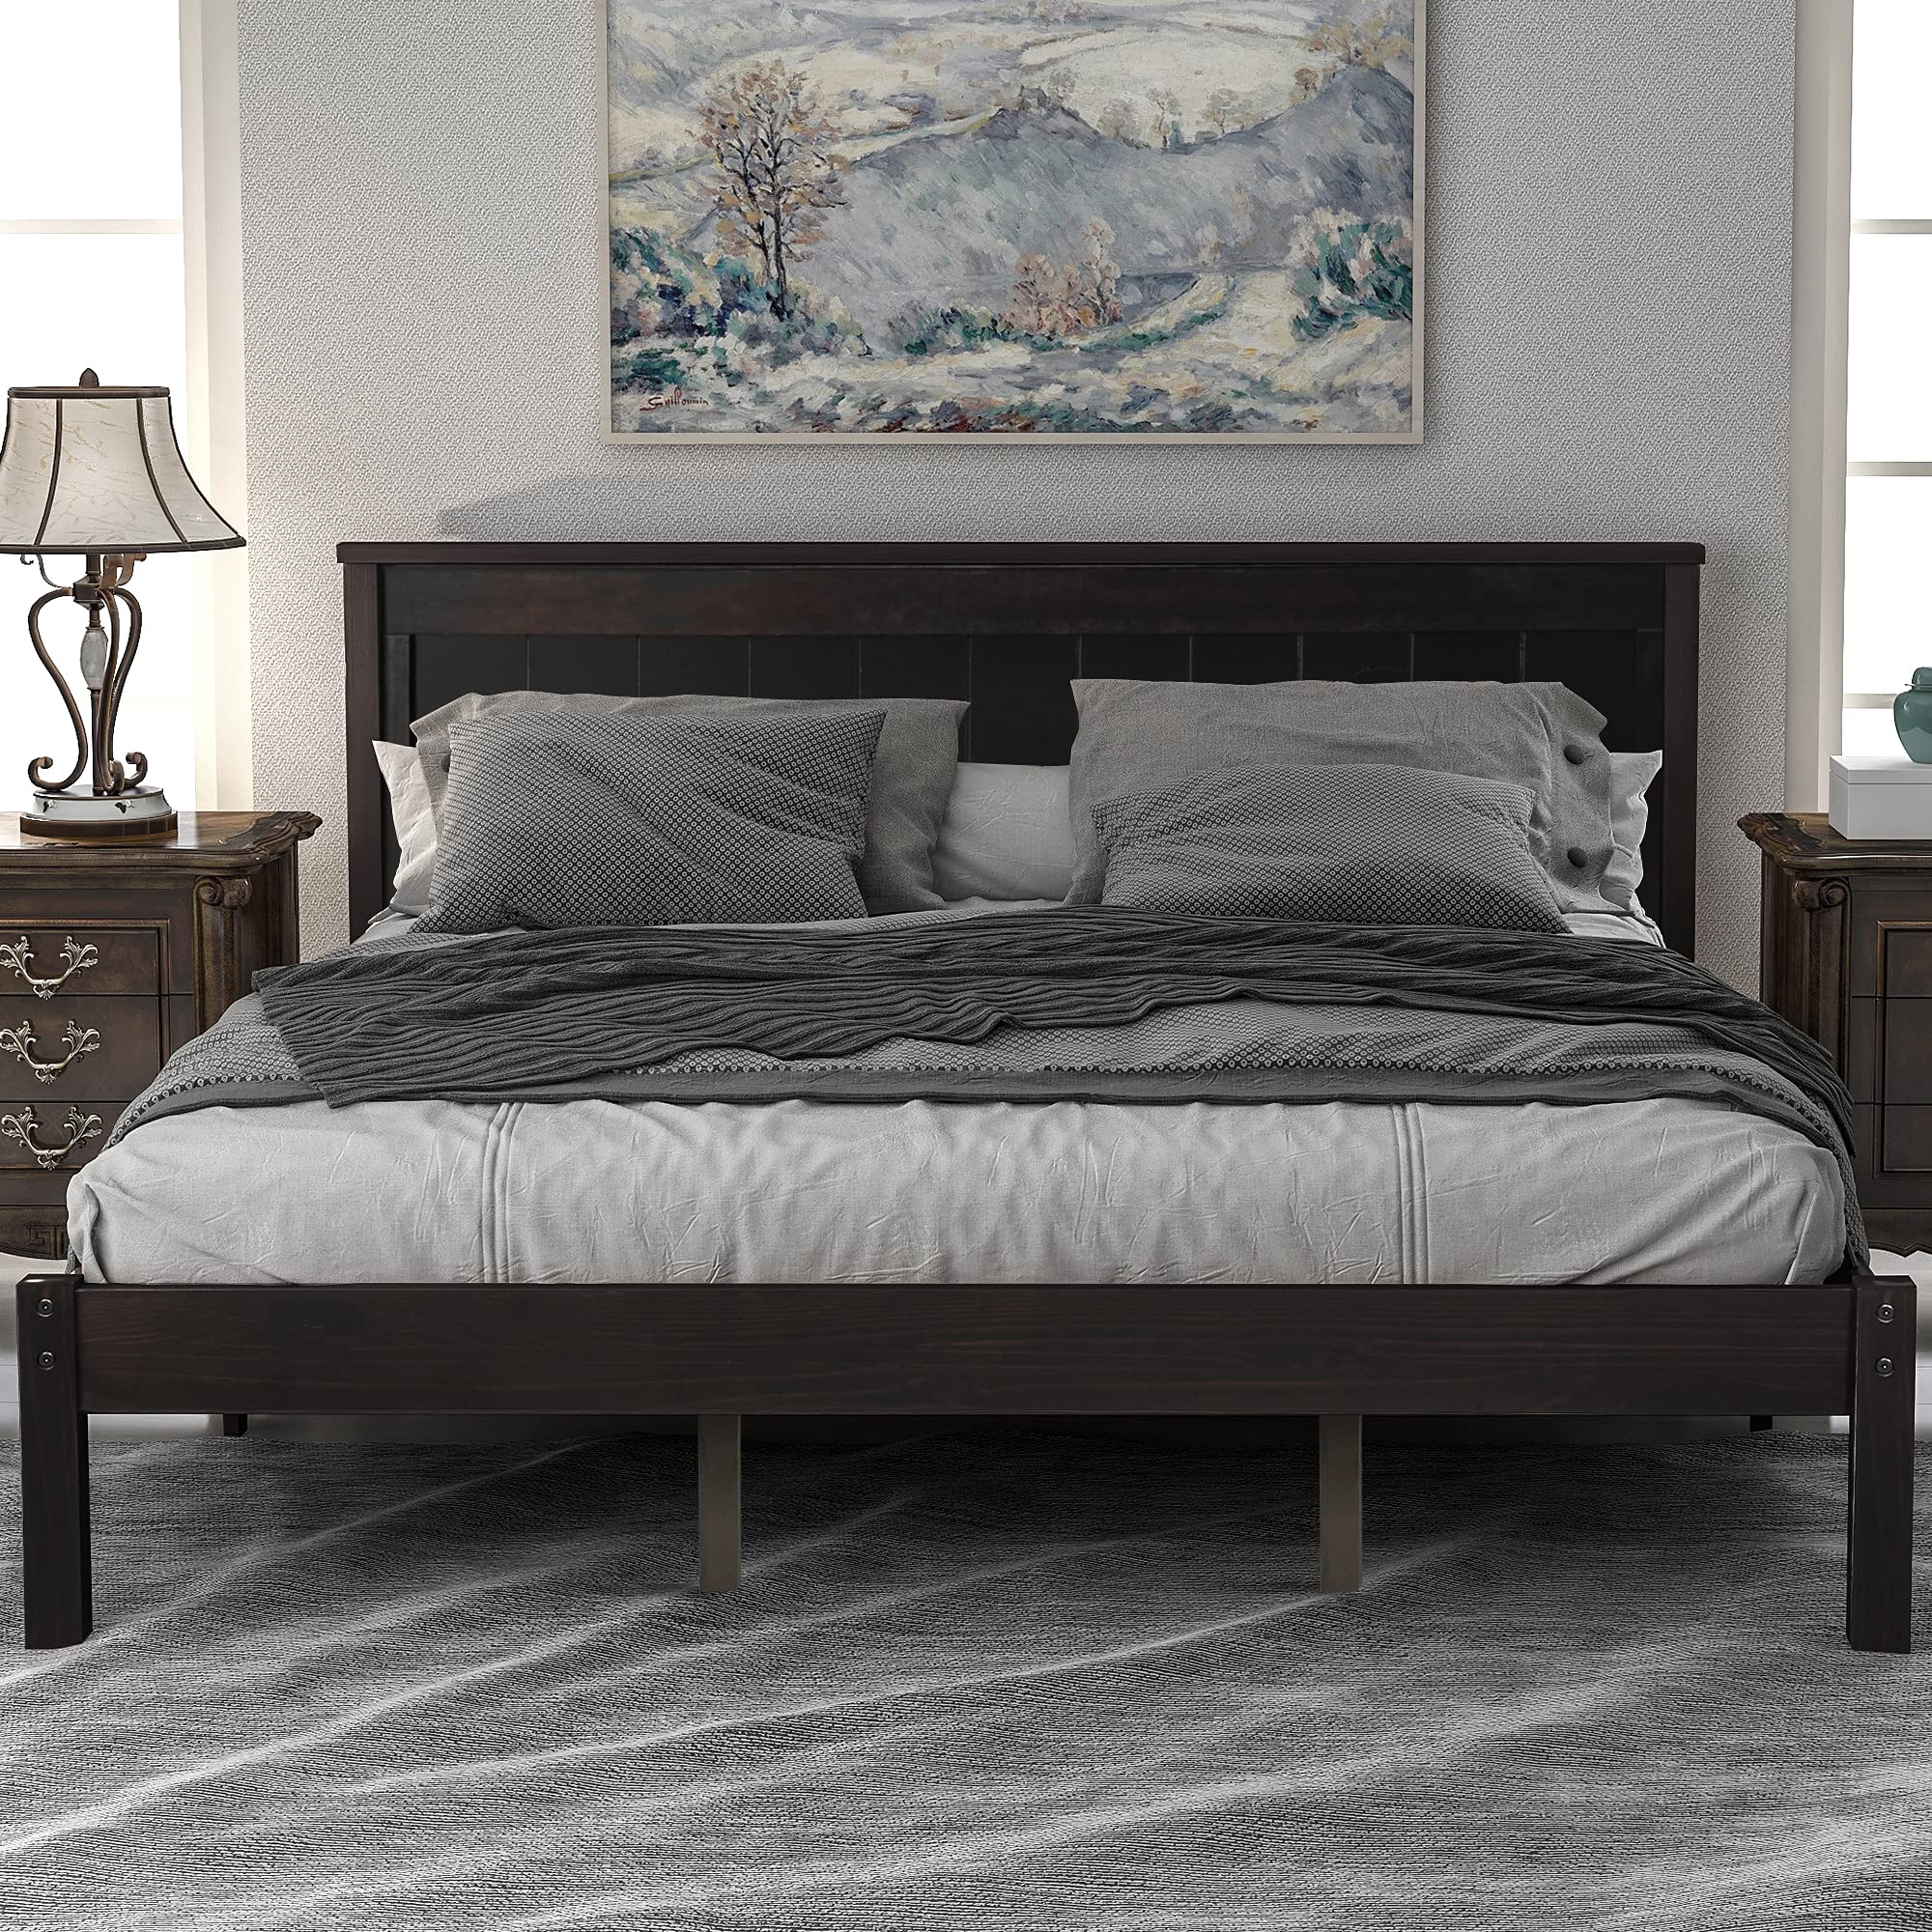 Queen Size Platform Bed Frame with Headboard, Wood Platform Bed with Slat Support